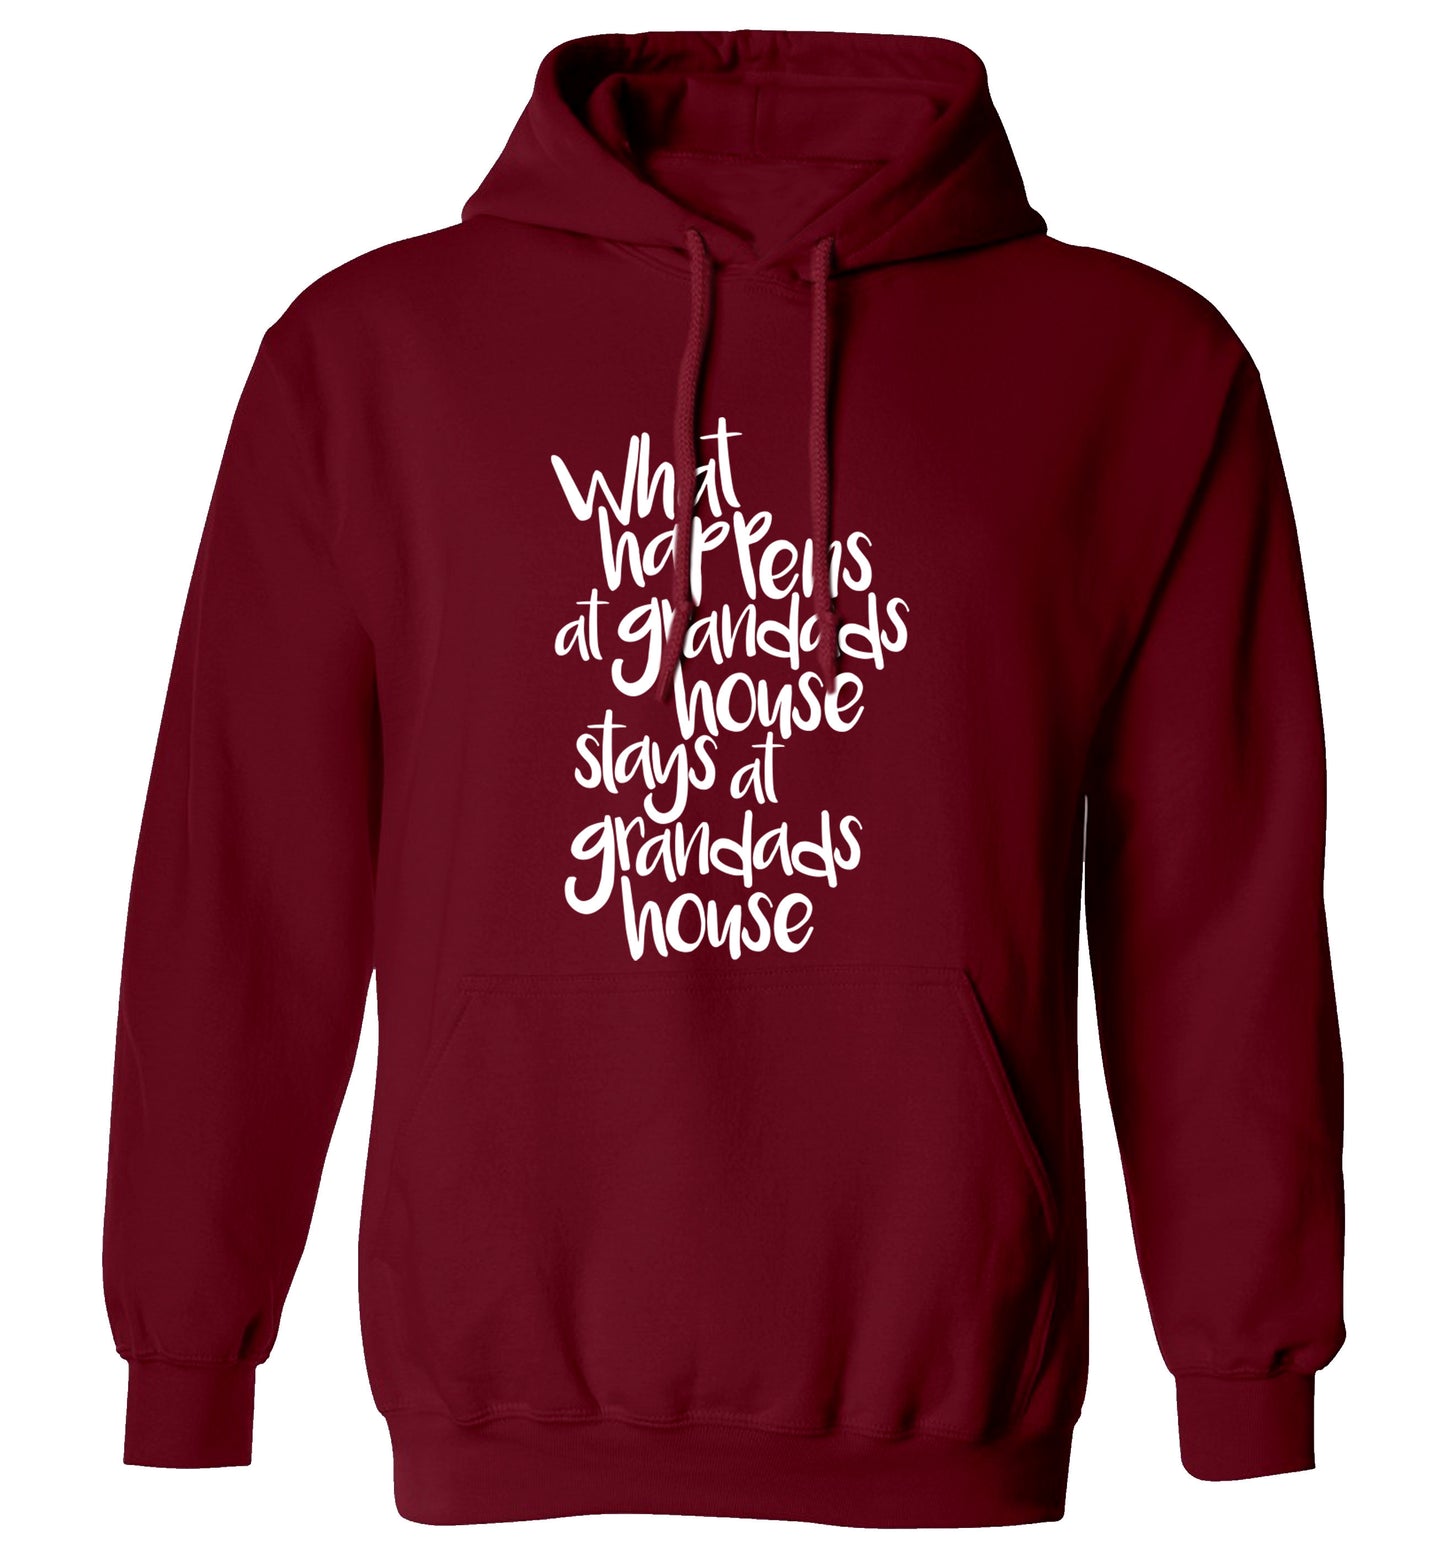 What happens at grandads house stays at grandads house adults unisex maroon hoodie 2XL